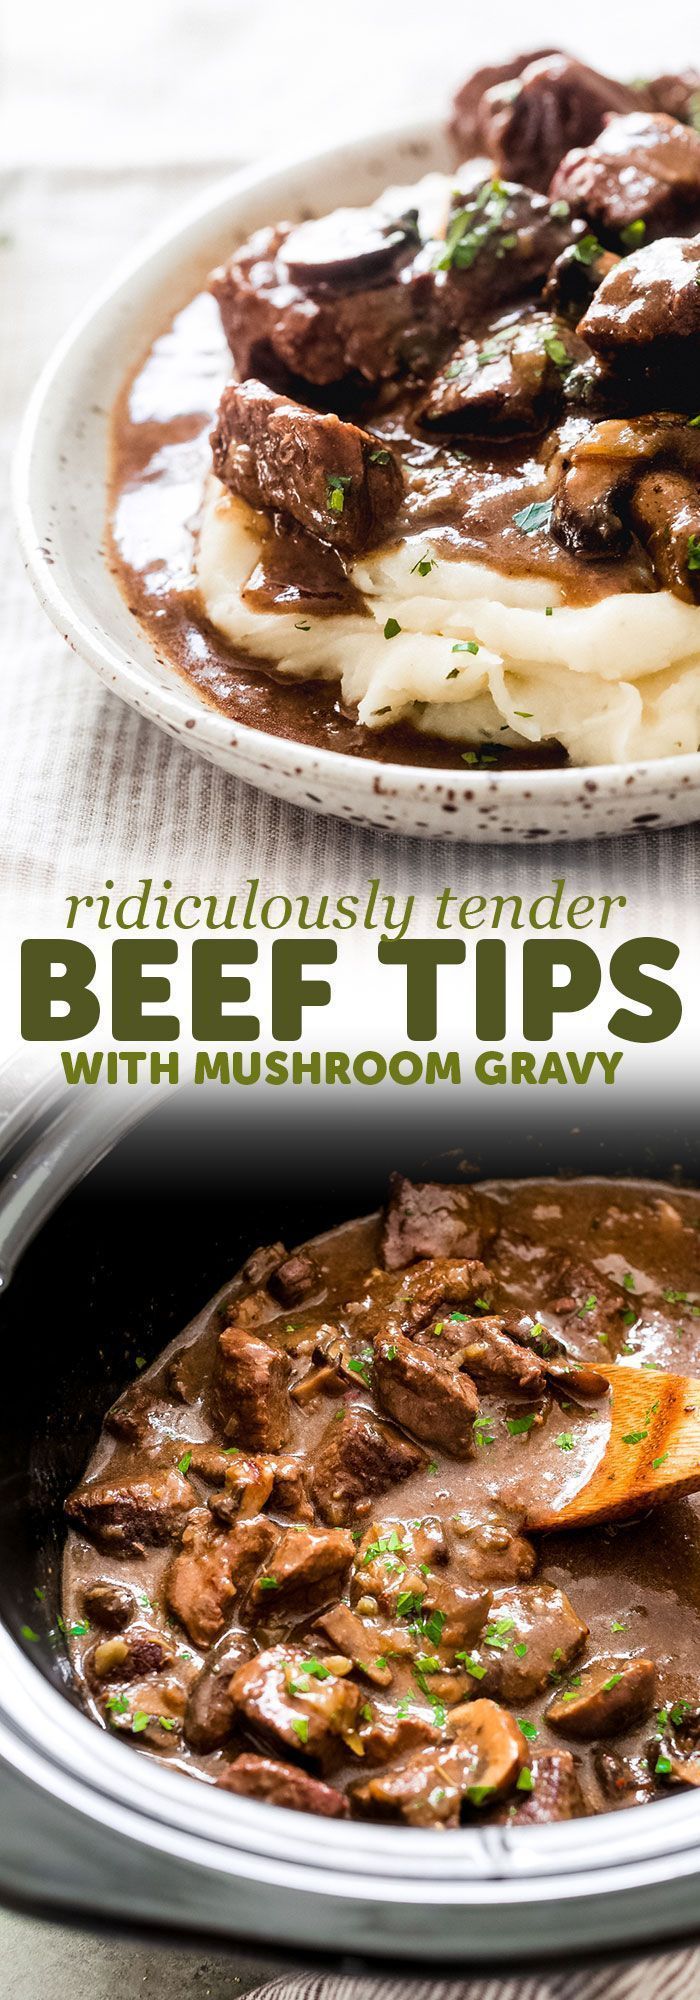 Ridiculously Tender Beef Tips with Mushroom Gravy Recipe -   19 healthy instant pot recipes beef tips ideas